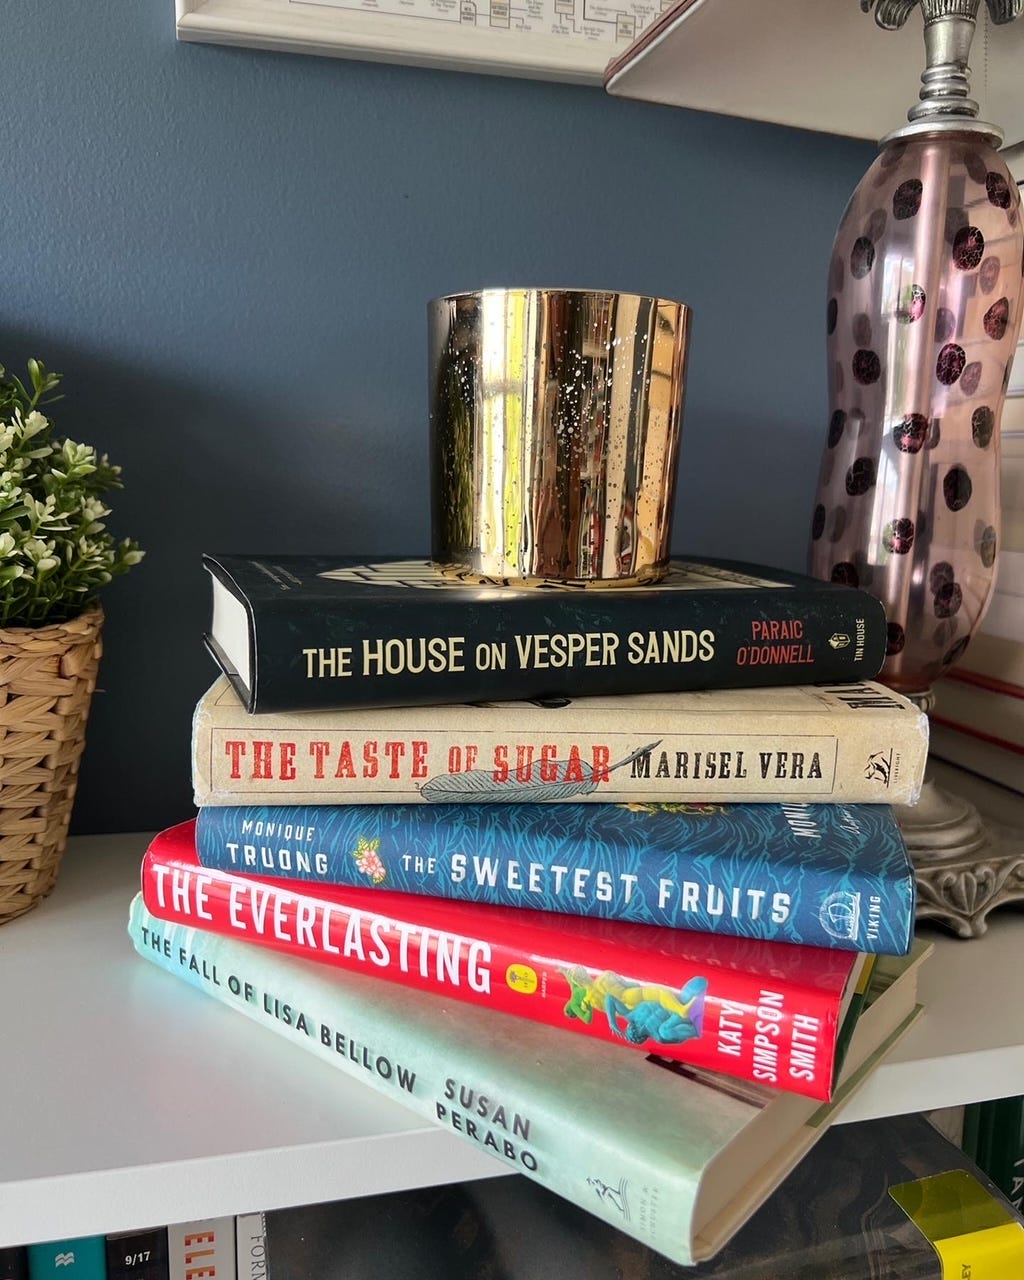 A stack of books with a candle on top. The books include The Fall of Lisa Bellow, The Everlasting, The Sweetest Fruits, The Taste of Sugar, and The House on Vesper Sands. 